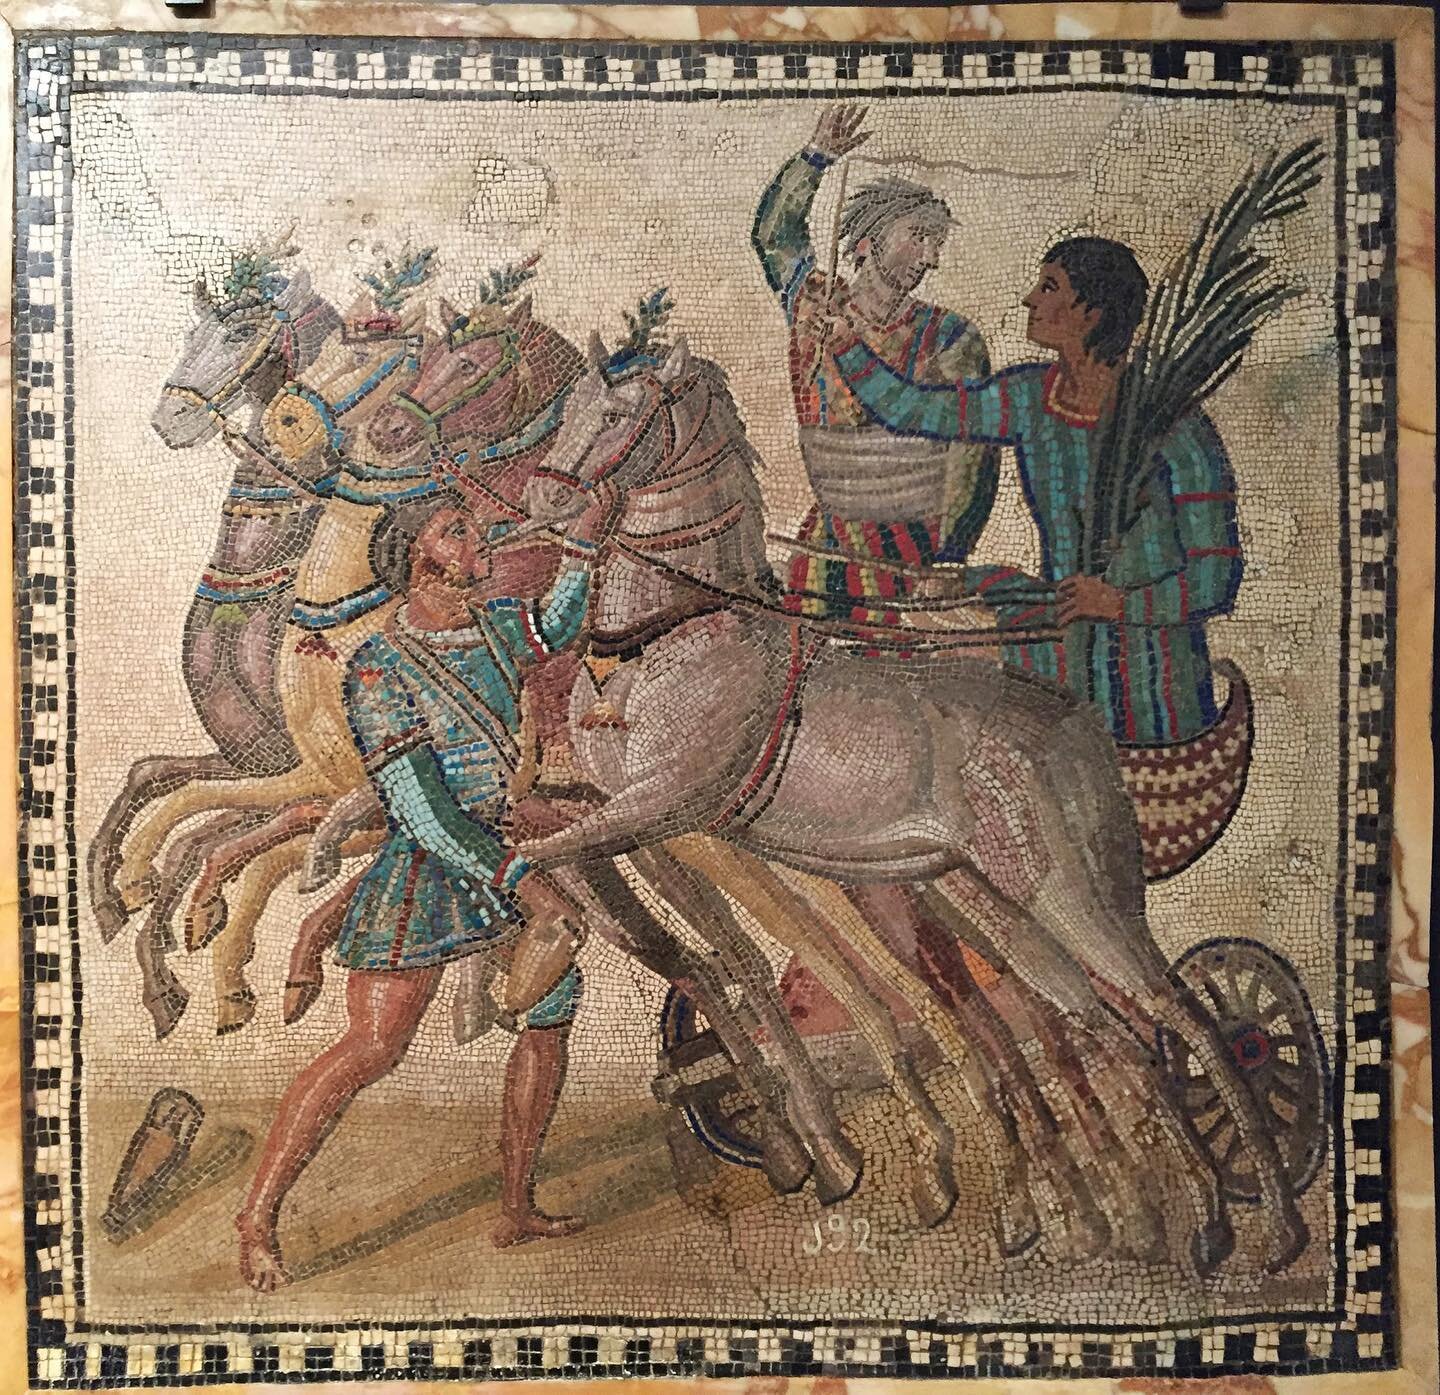 Hello #mosaicmondayinspiration ! I recently dug out a picture of this fabulous mosaic of quadriga (four-horse abreast) chariot and can&rsquo;t get enough of it!⁣
The guy with a tiny hand raised up is called a iubilator. He announces the winners. The 